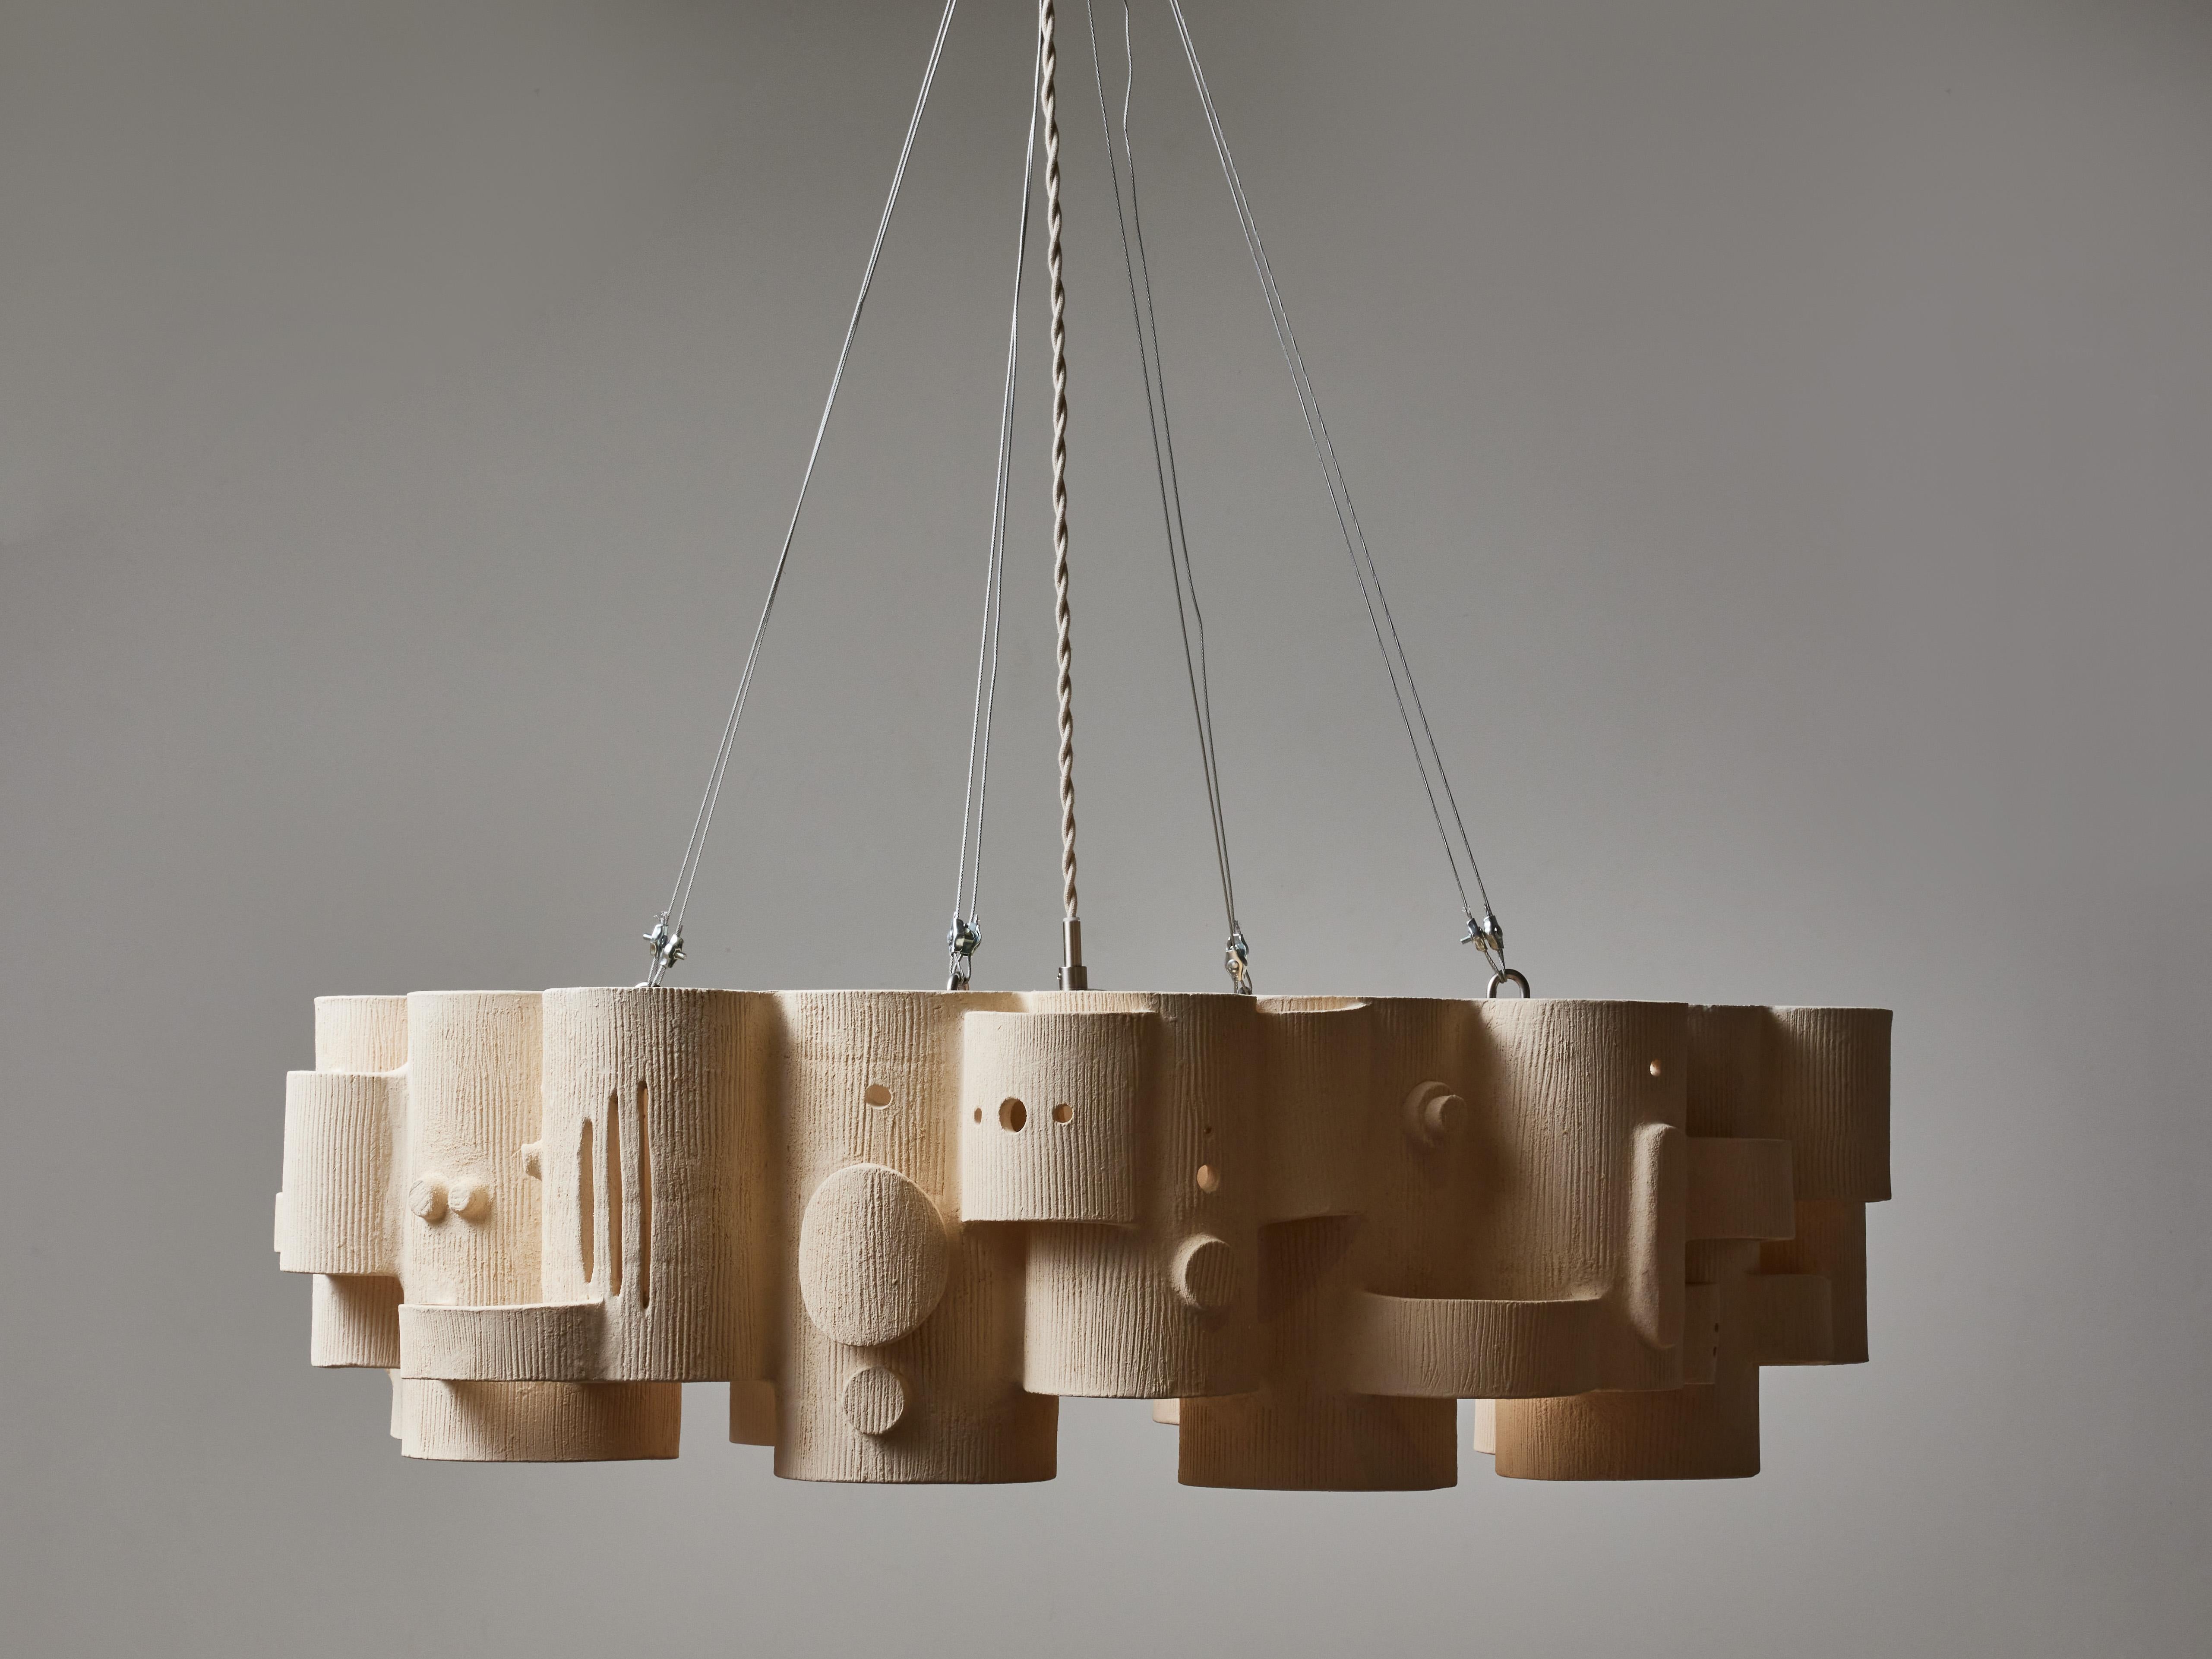 Ceramic chandelier made by the french artist Olivia Cognet, made of different sized cylinders put together covered with decorative elements.

Since moving to Los Angeles in 2016, French artist and designer Olivia Cognet has focused on ceramics as